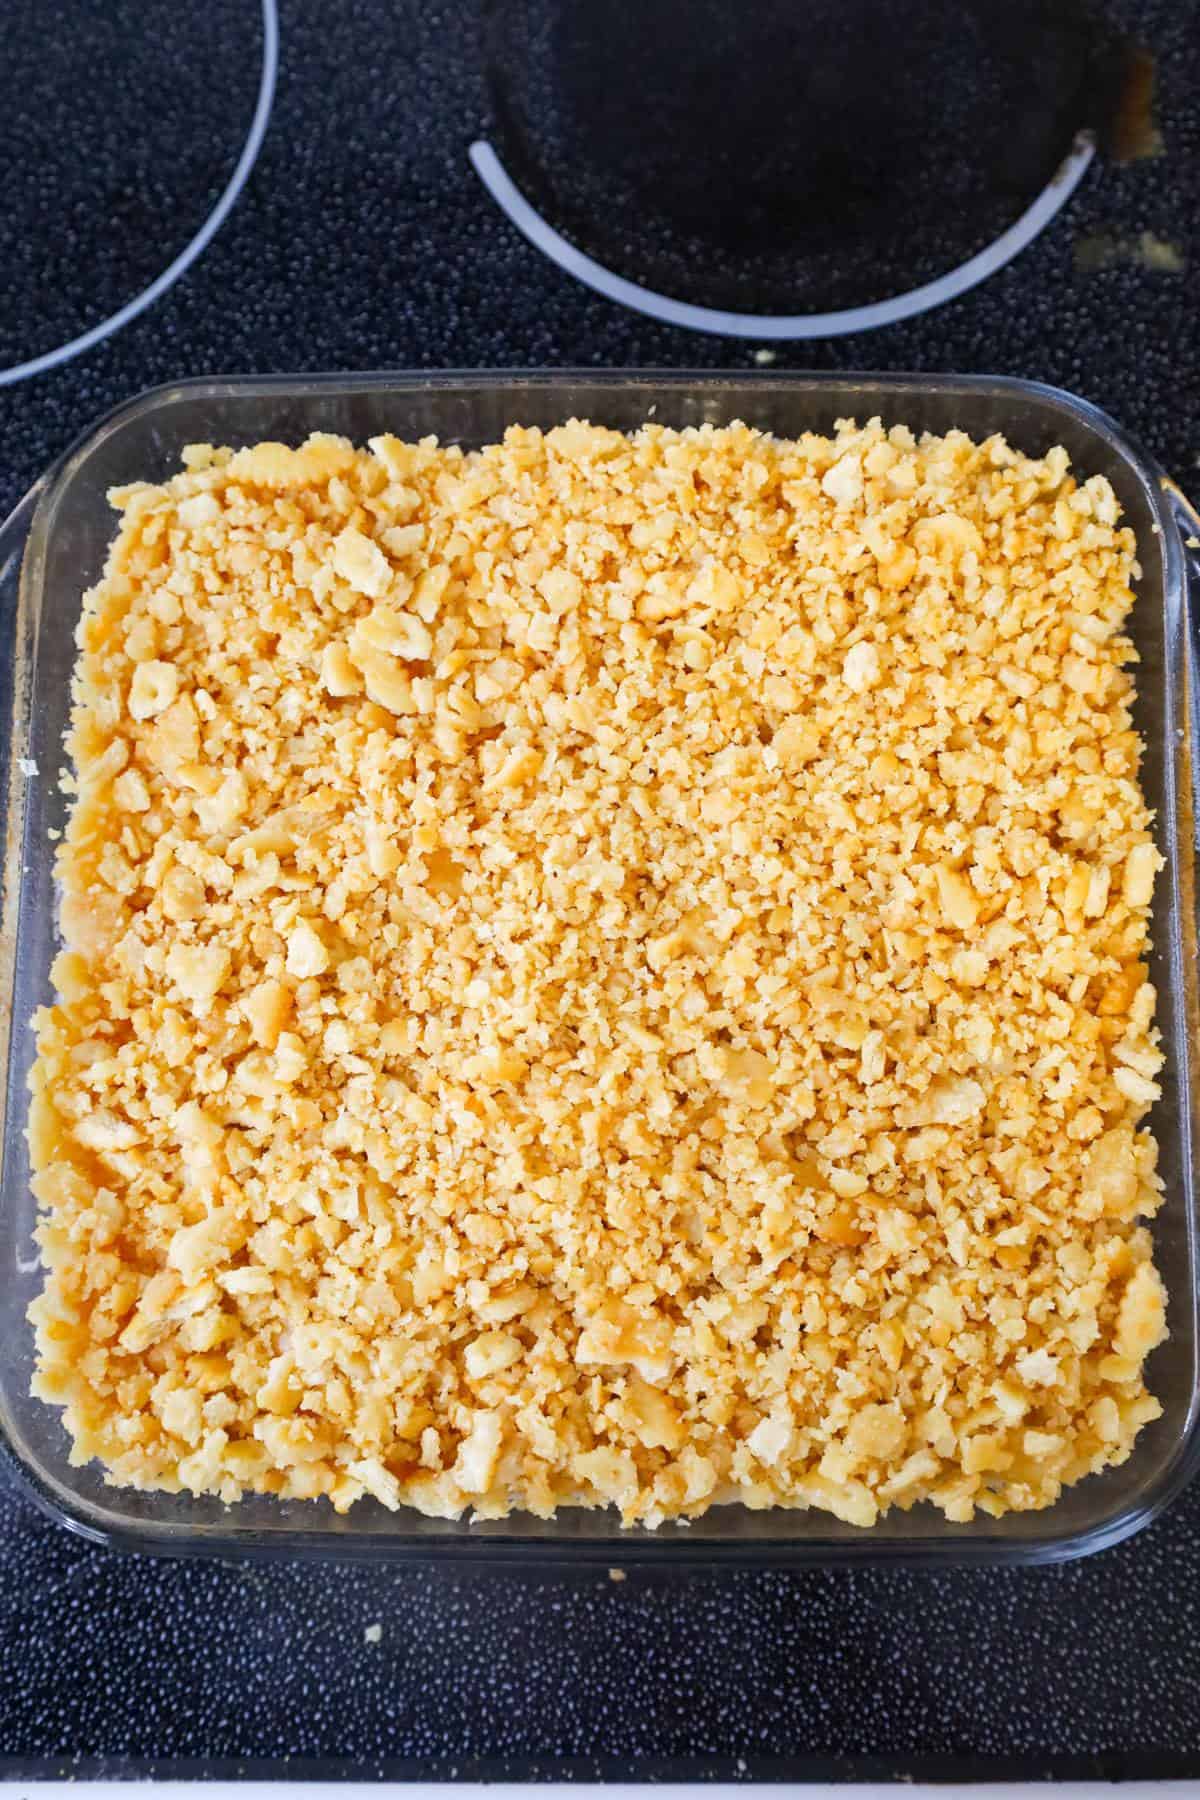 crumbled Ritz crackers on top of pineapple casserole before baking